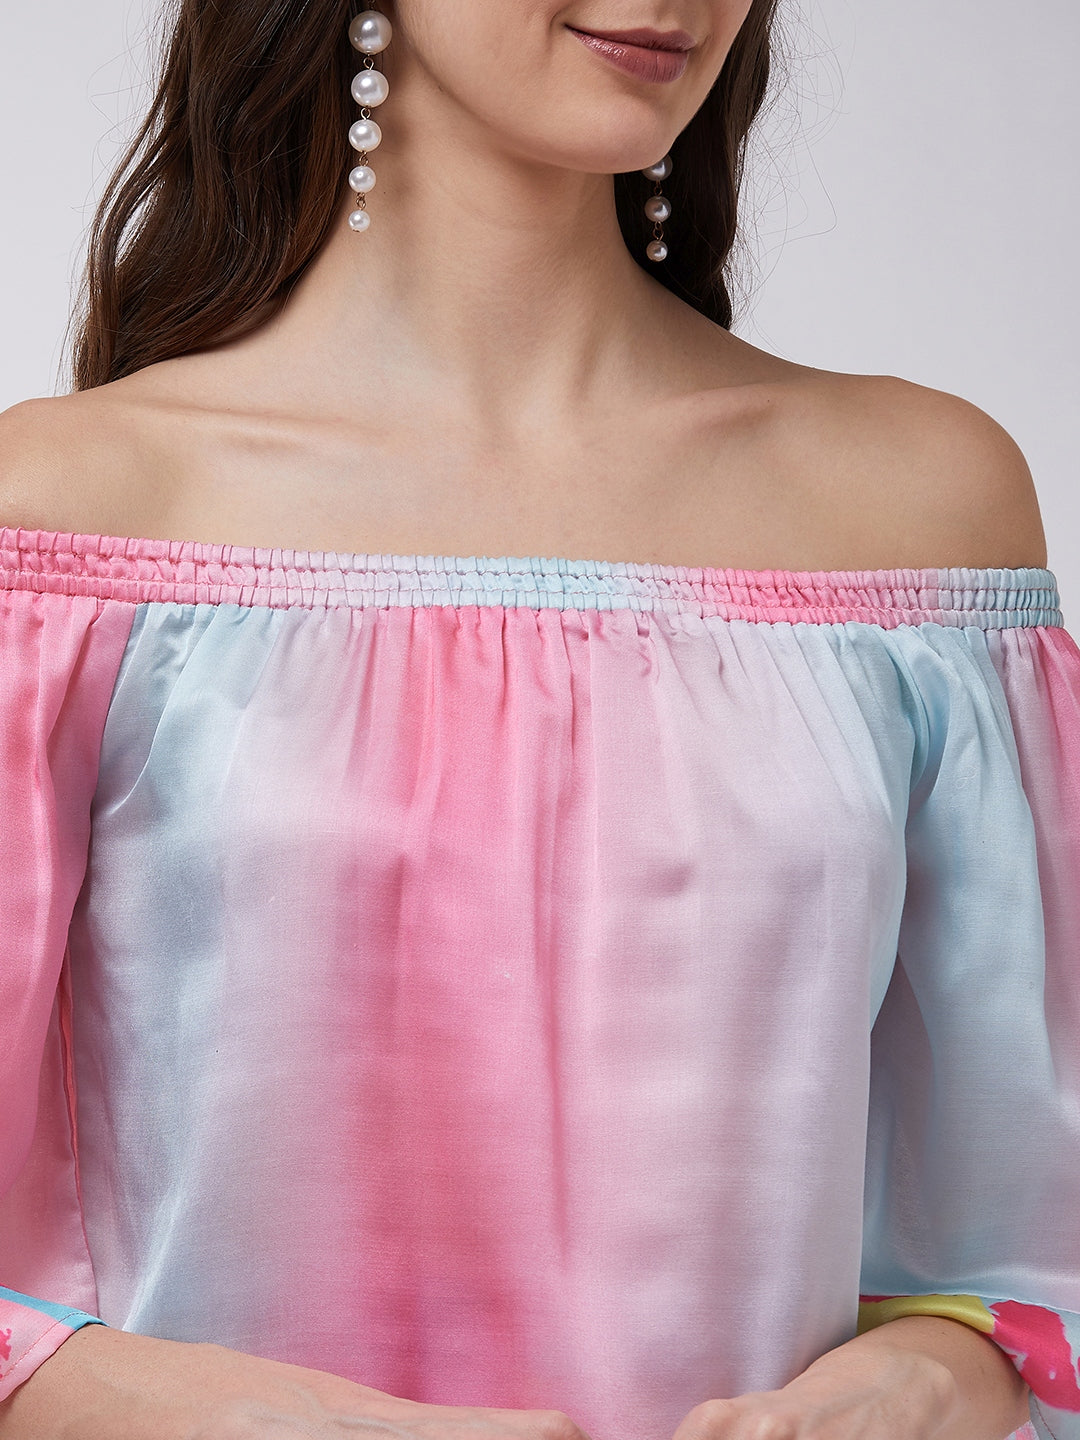 Candy Inspired Digital Printed Off-Shoulder Top With Baggy Pants